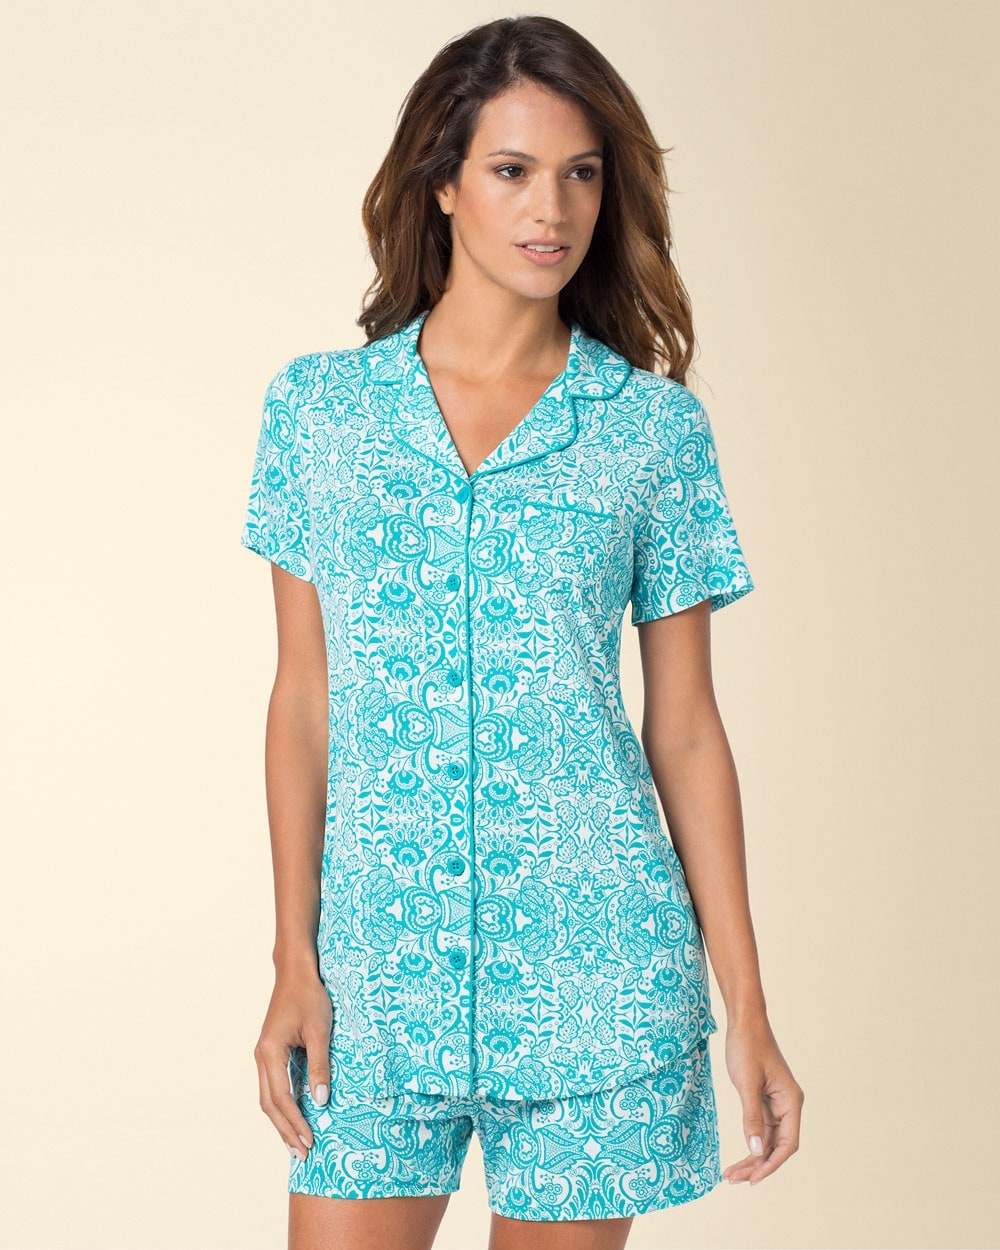 Embraceable Cool Nights Short Sleeve Pajama Top Lacy Floral Viridian